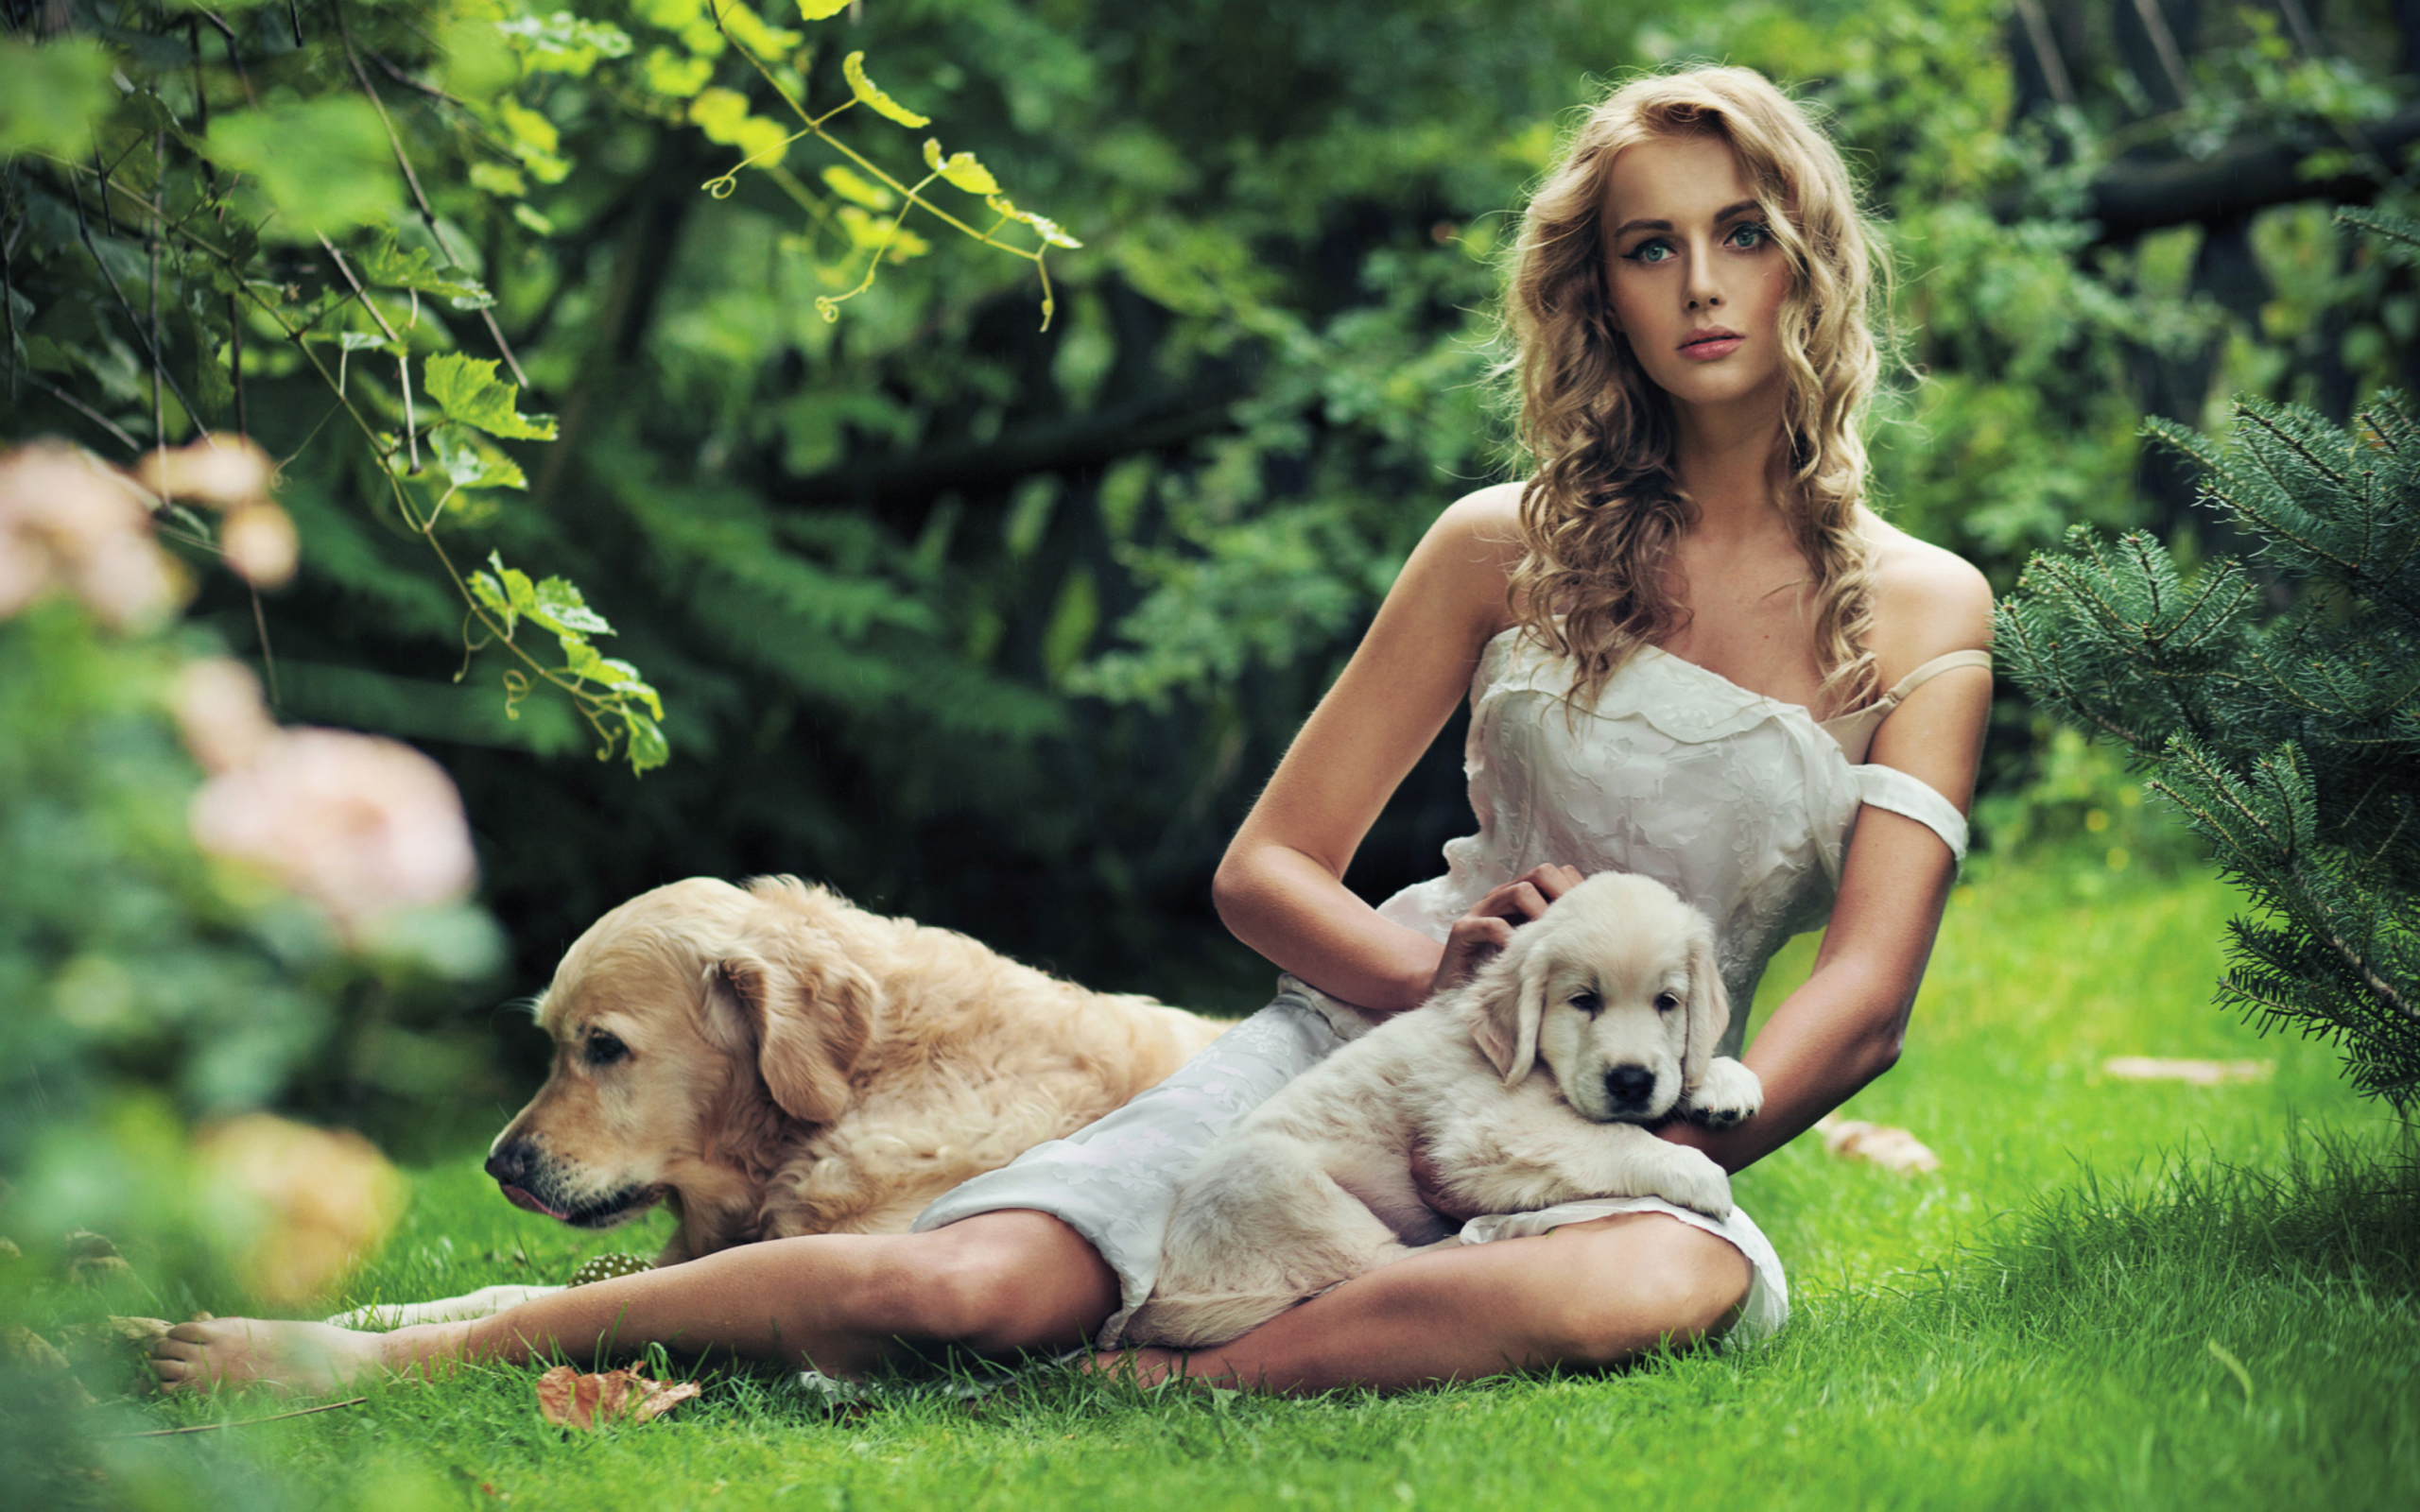 Model And Dogs wallpaper 2560x1600